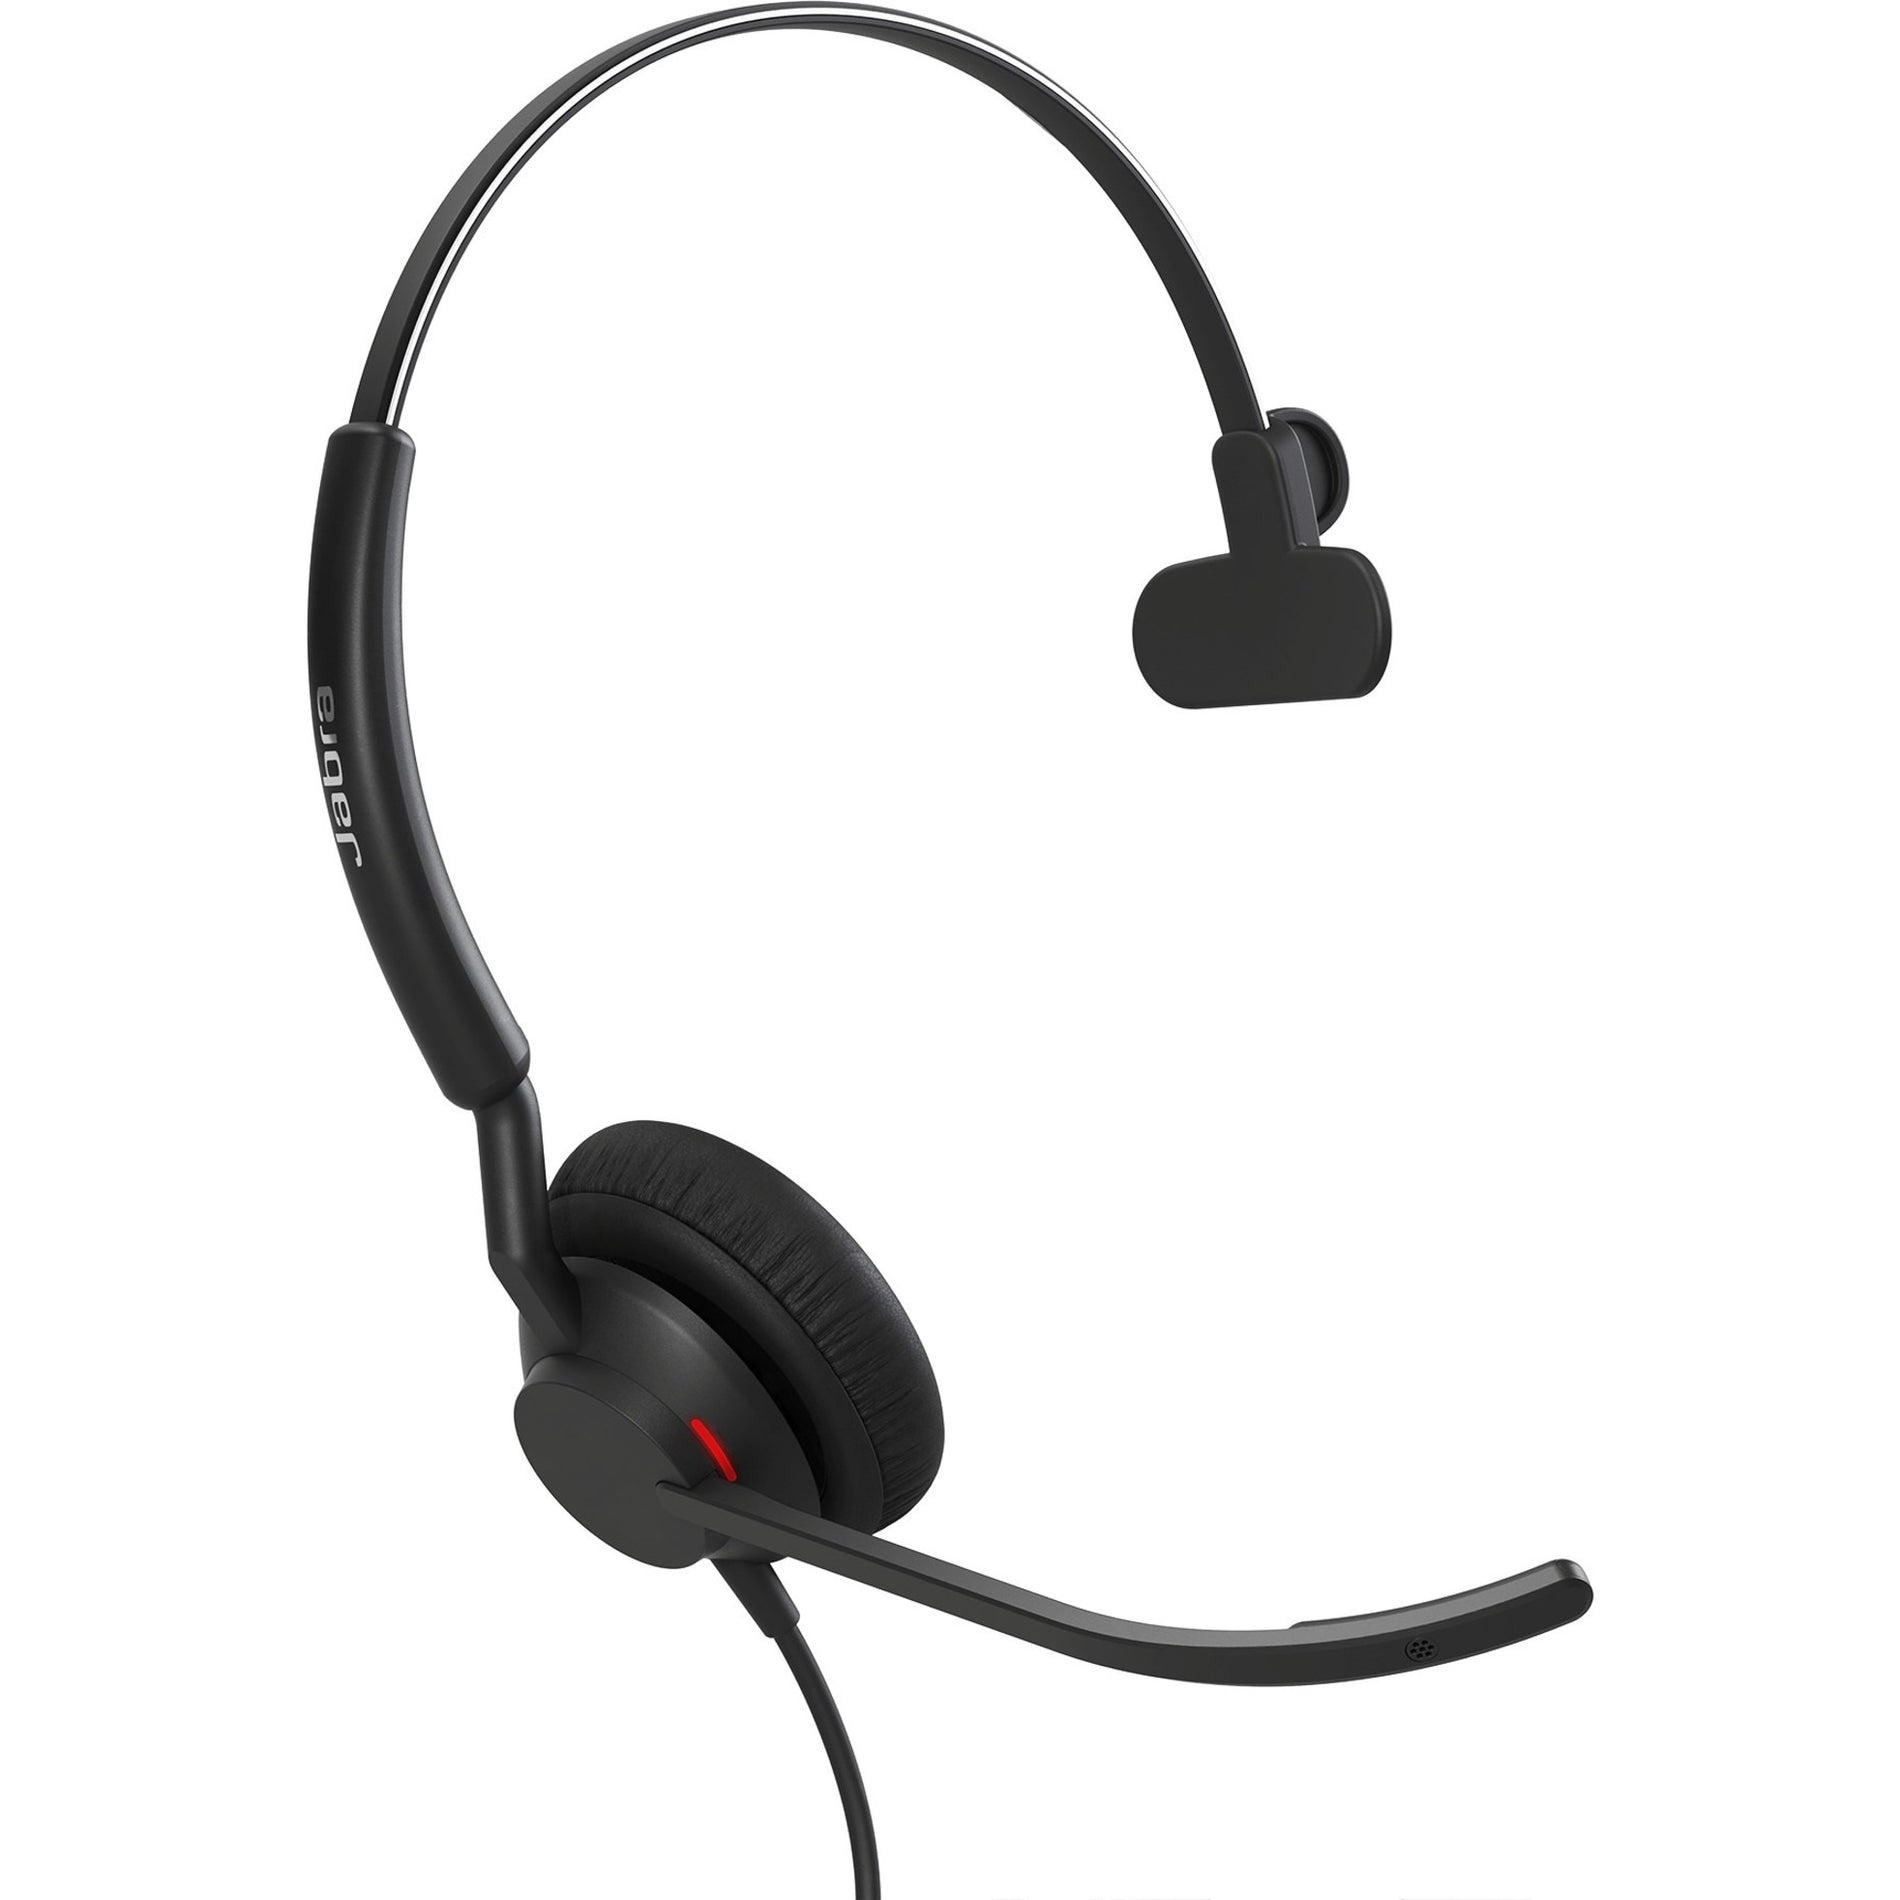 Jabra 4093-410-279 ENGAGE 40 Headset, Over-the-head USB Type A Wired Mono Headset with Noise Isolation, Comfortable Design, and 3-Year Warranty